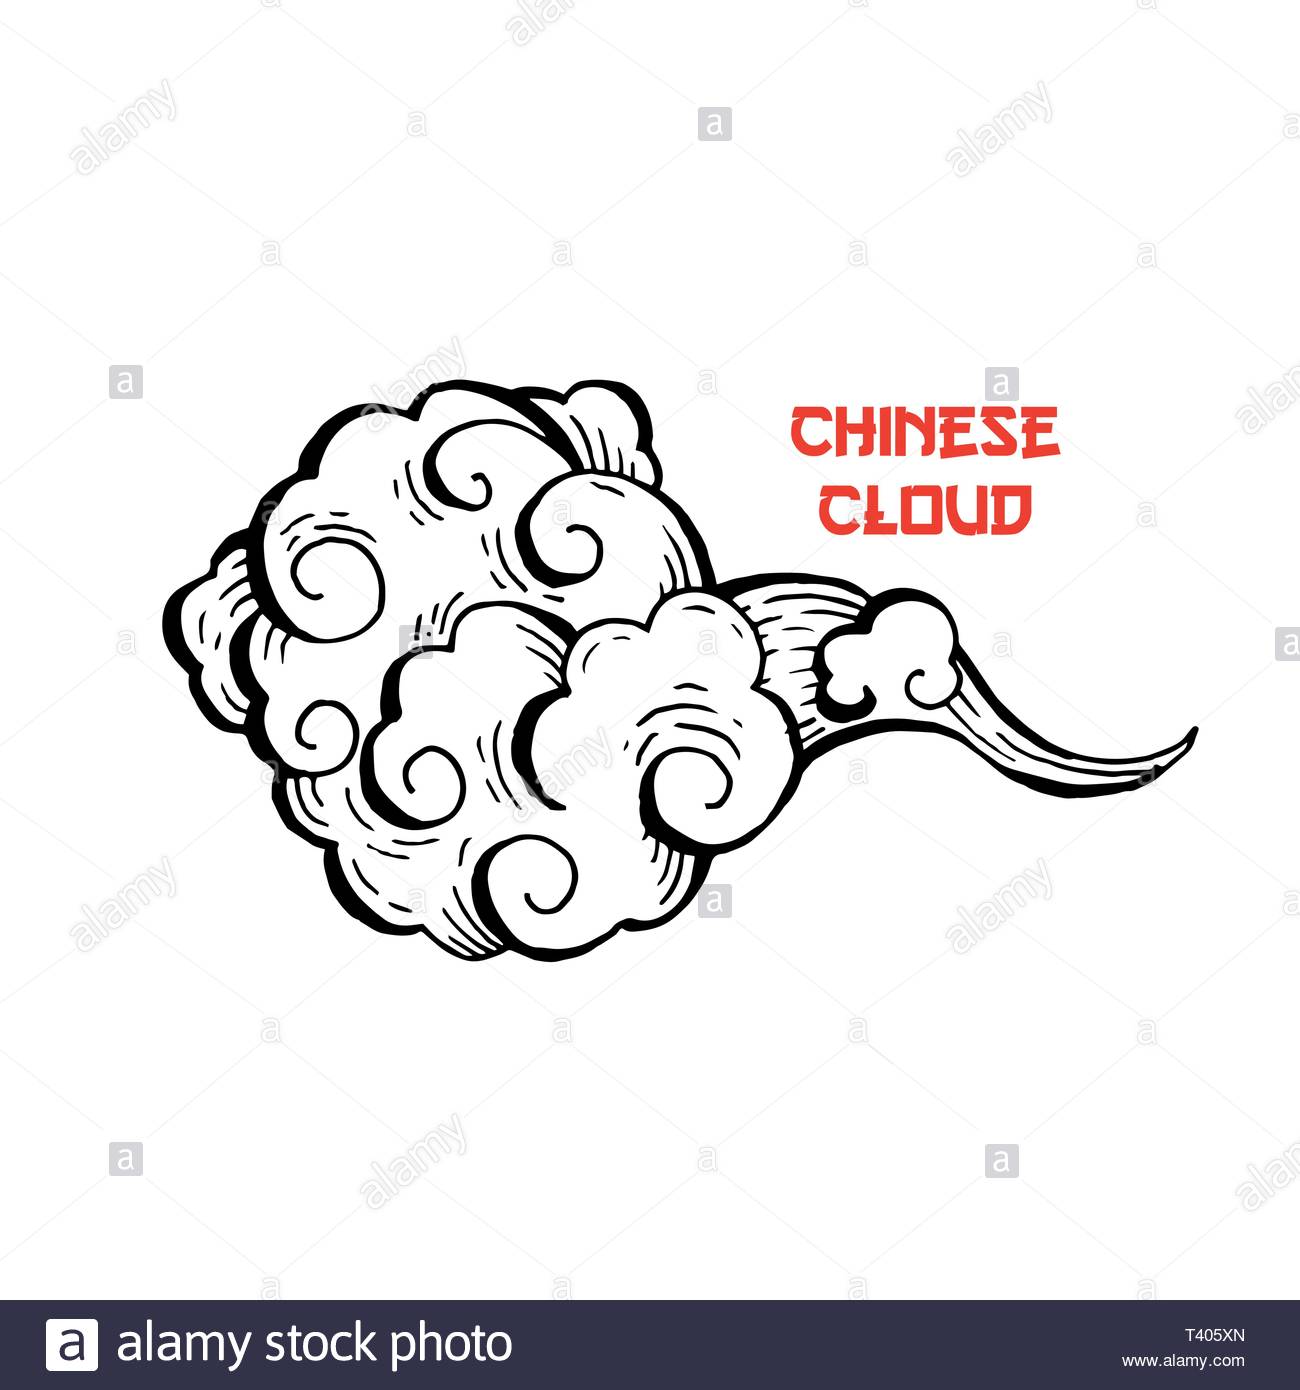 Clouds hand drawn vector illustration. Overcloud ink pen sketch.